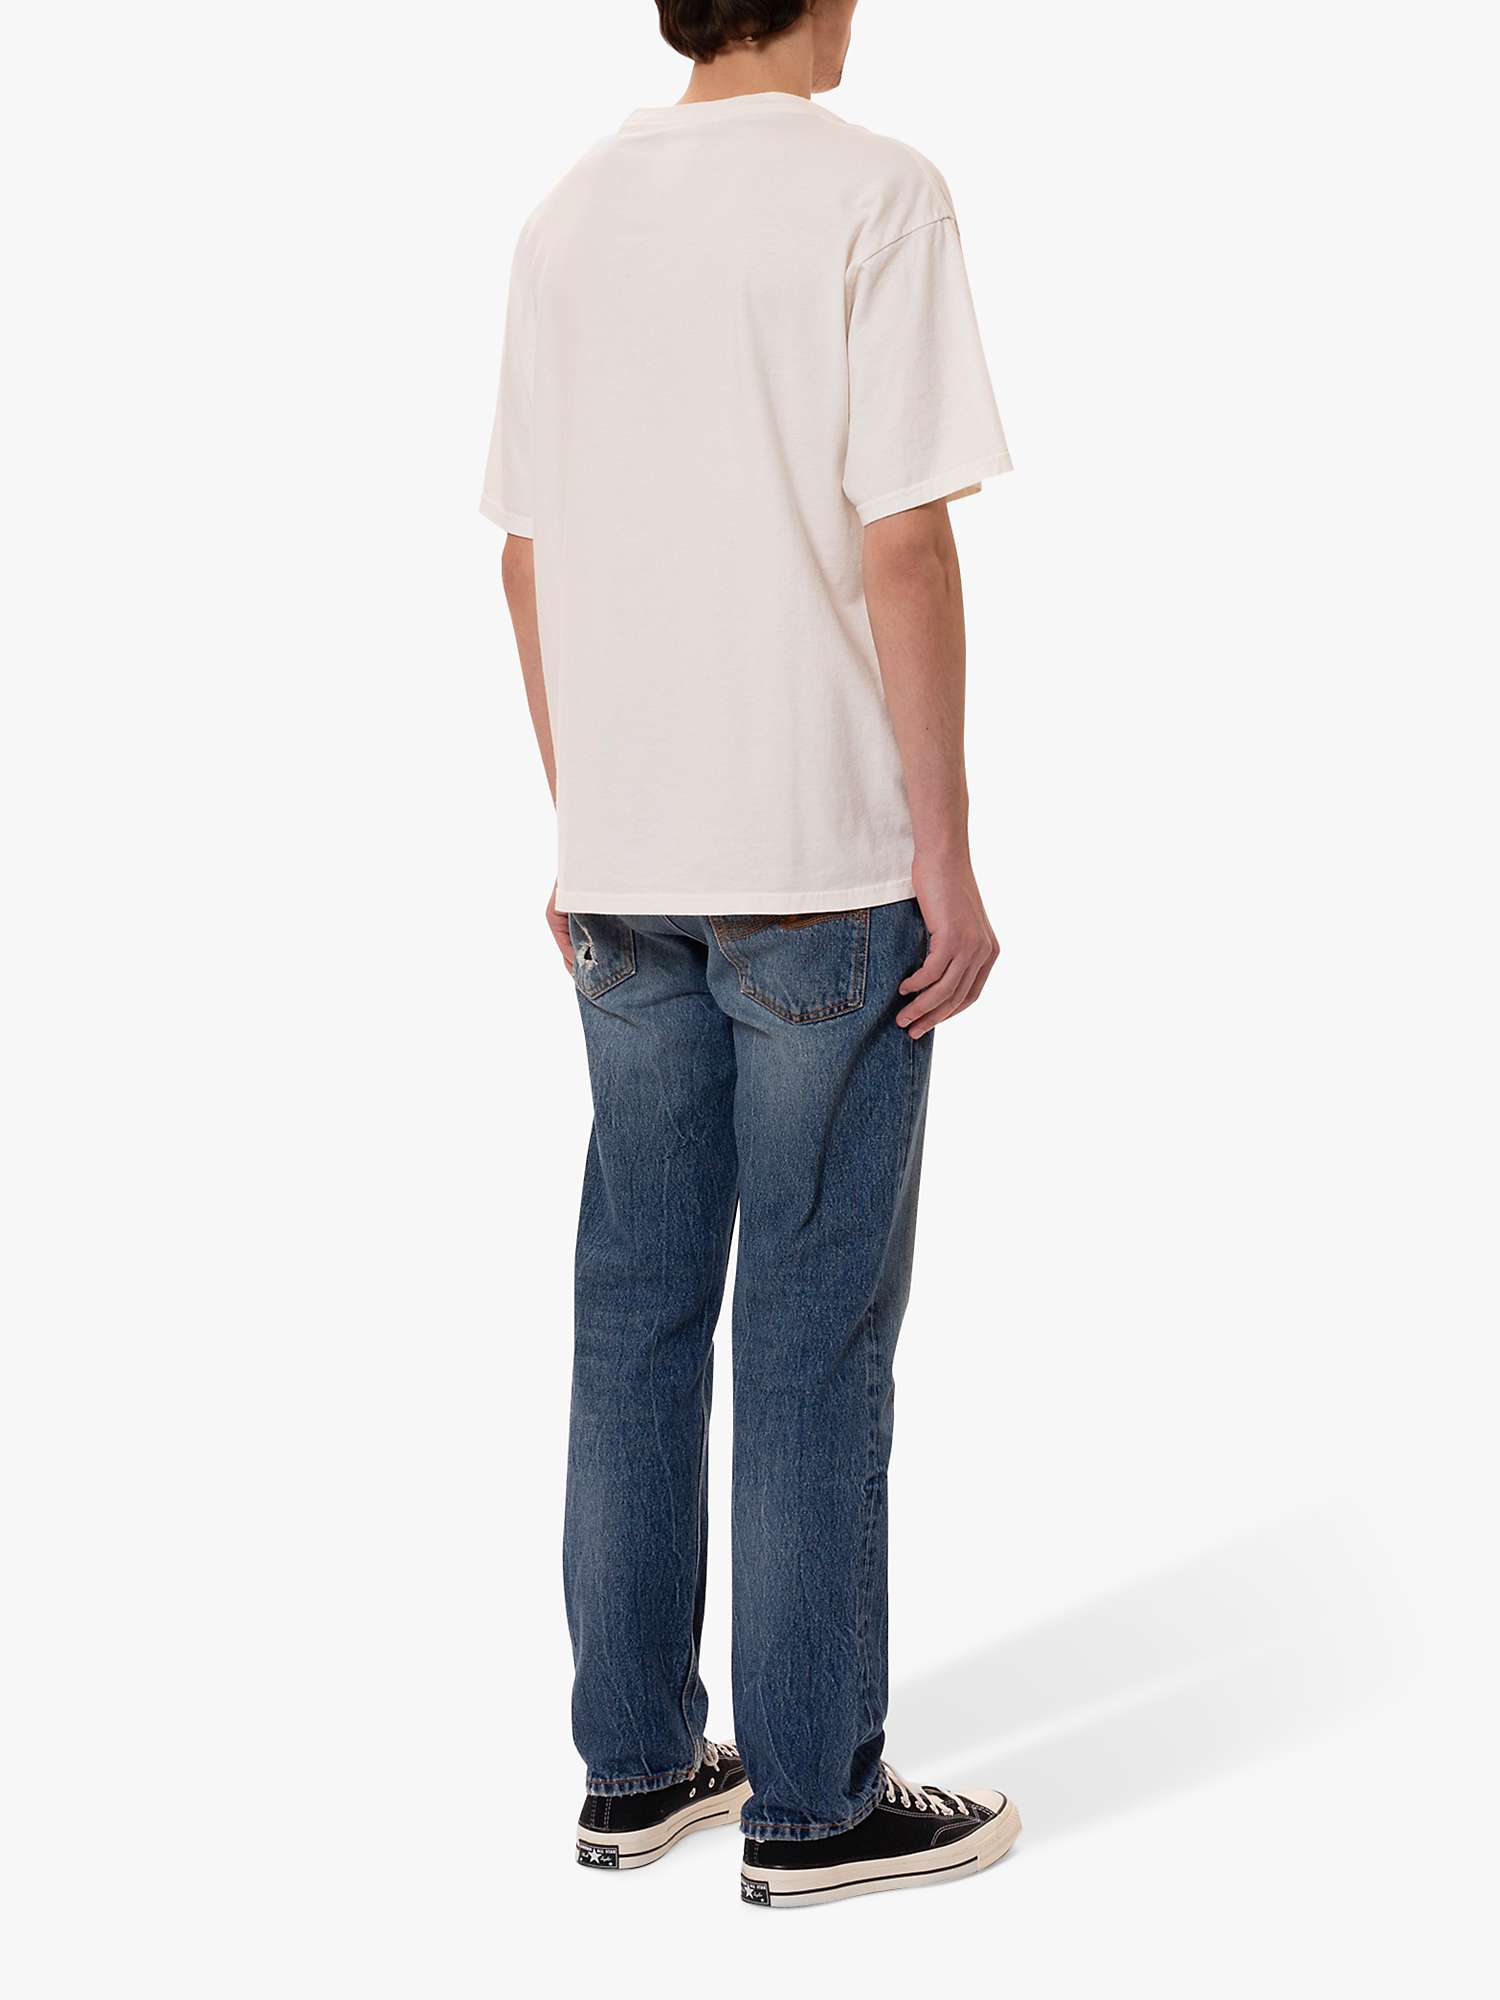 Buy Nudie Jeans Koffe Organic Cotton T-Shirt, White/Blue Online at johnlewis.com